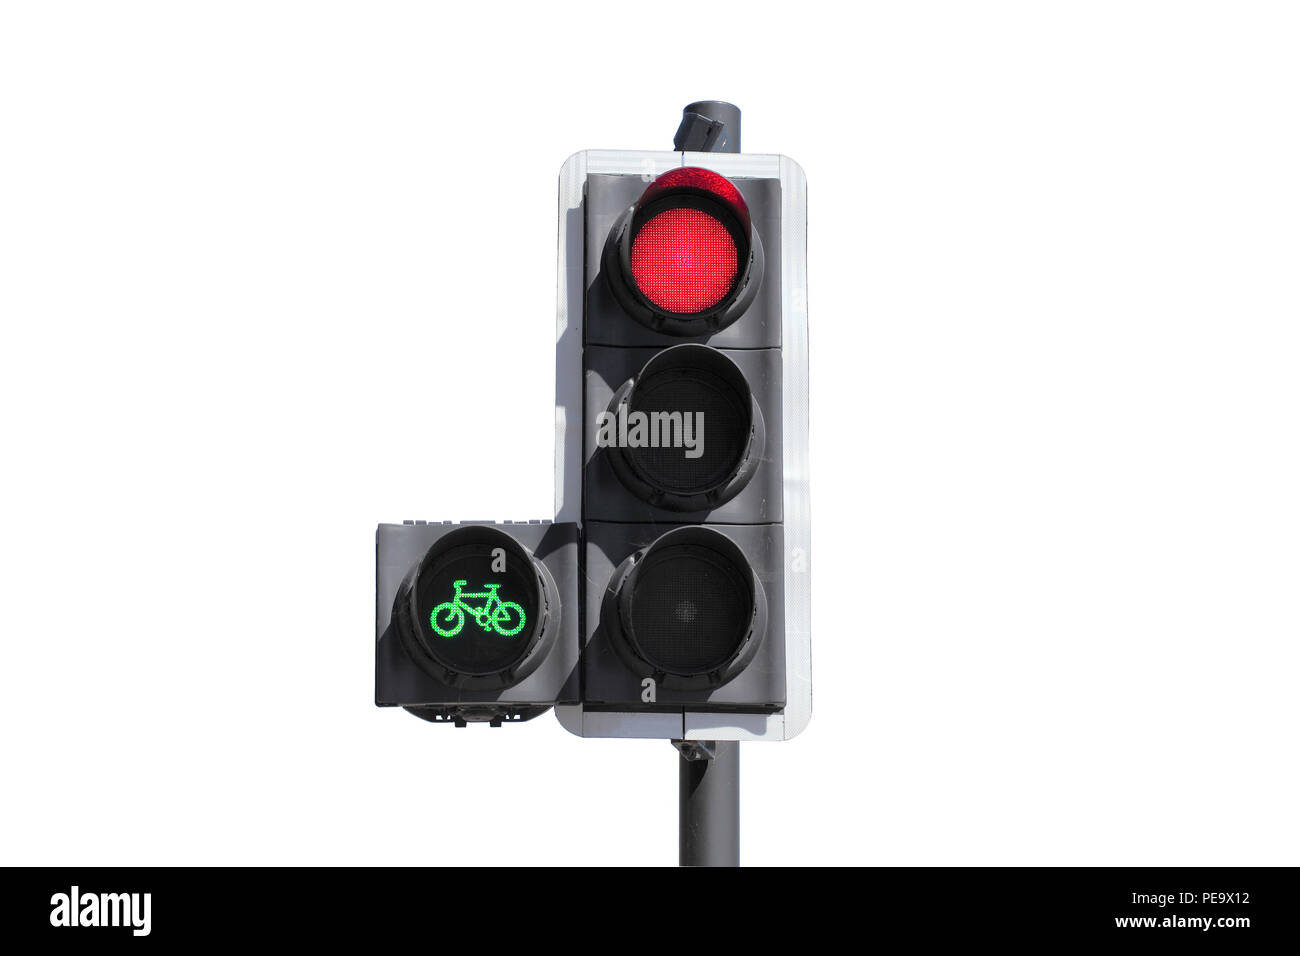 A cycle priority traffic signal. The green light gives cyclists a headstart, allowing them to cross the junction before the rest of the traffic. Stock Photo